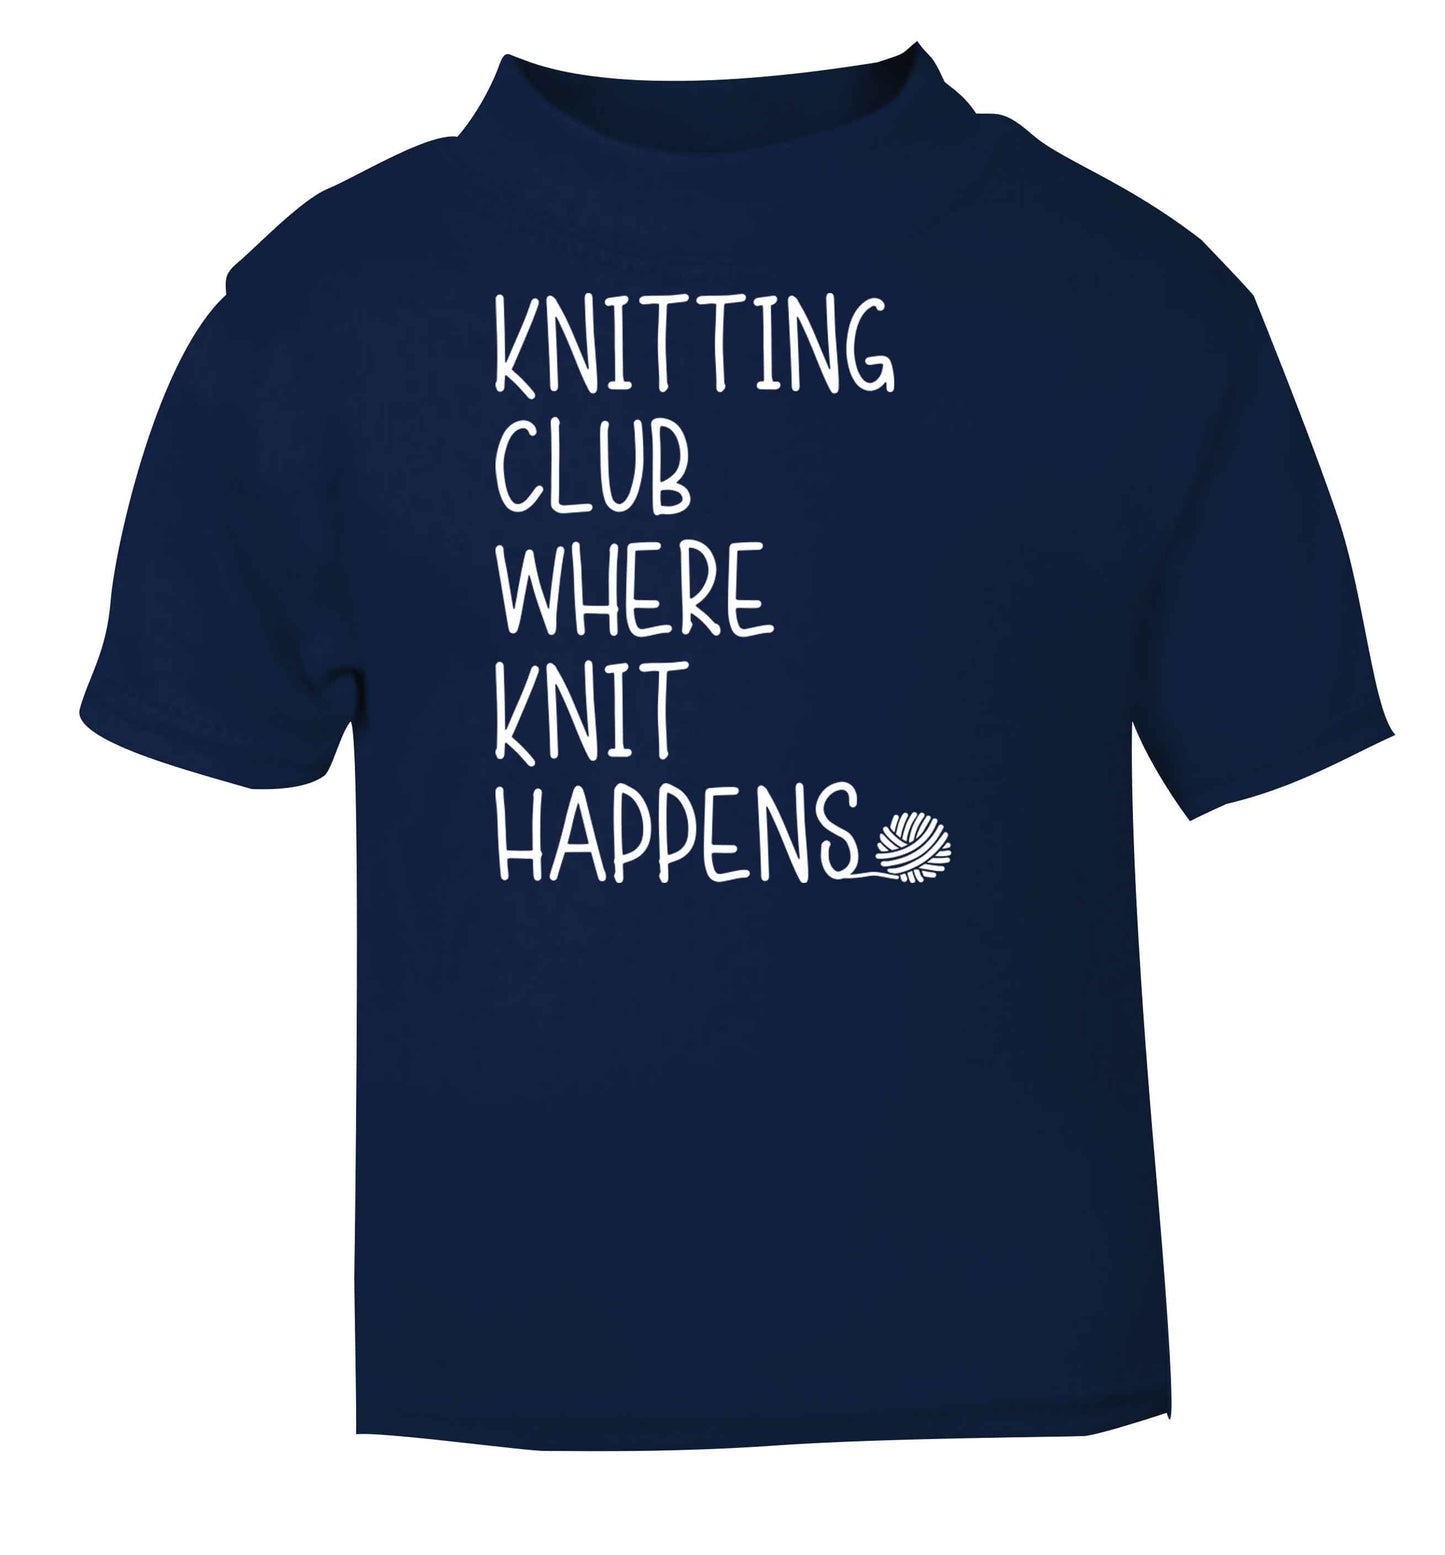 Knitting club where knit happens navy baby toddler Tshirt 2 Years